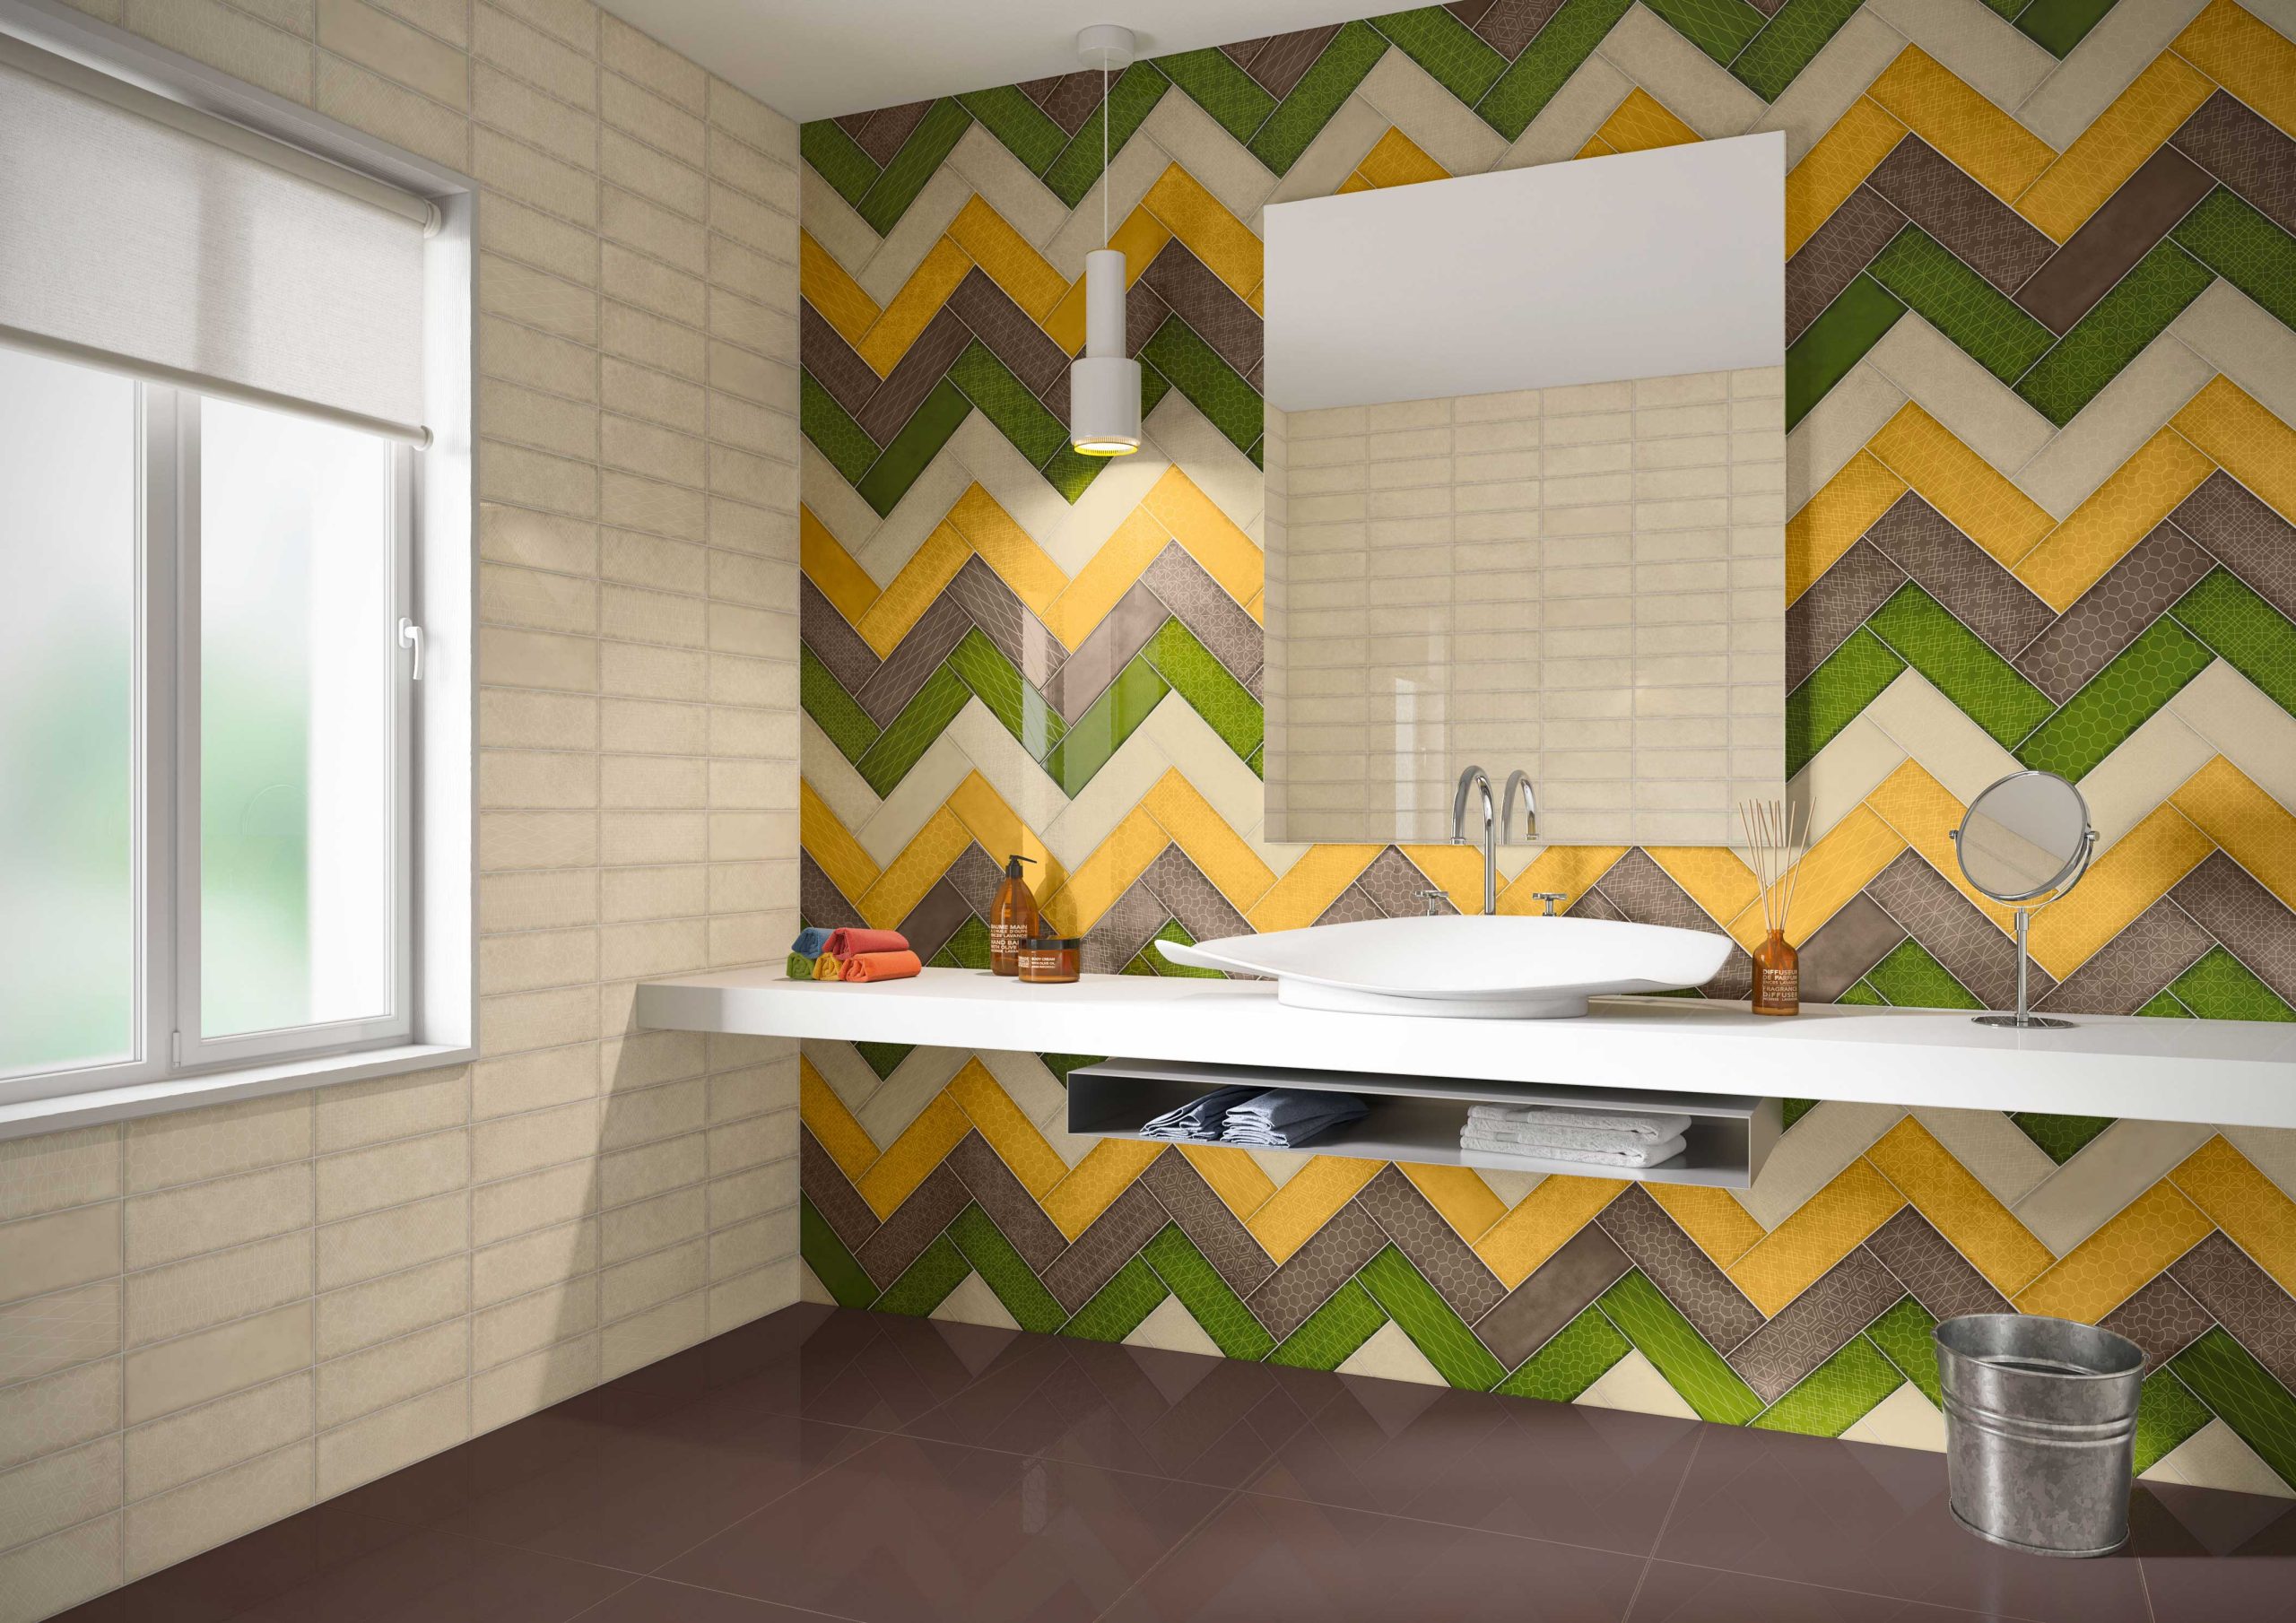 Nectar Ceramic Tile Wall Materials Collection | Creative